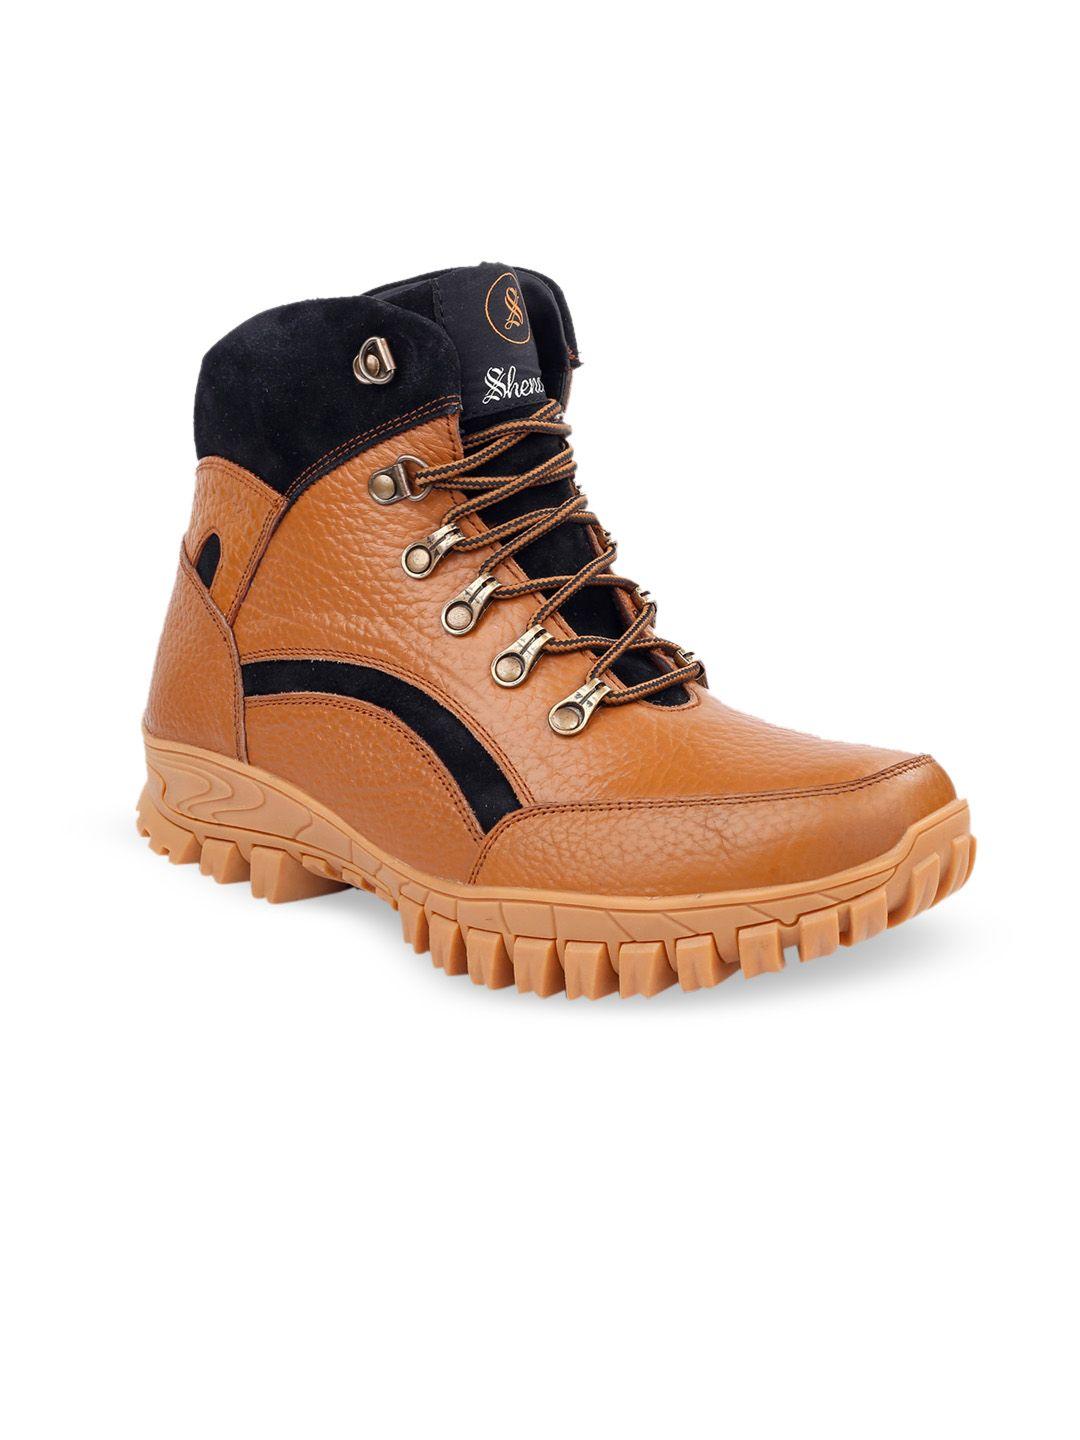 shences men tan brown & black mid topleather flat boots